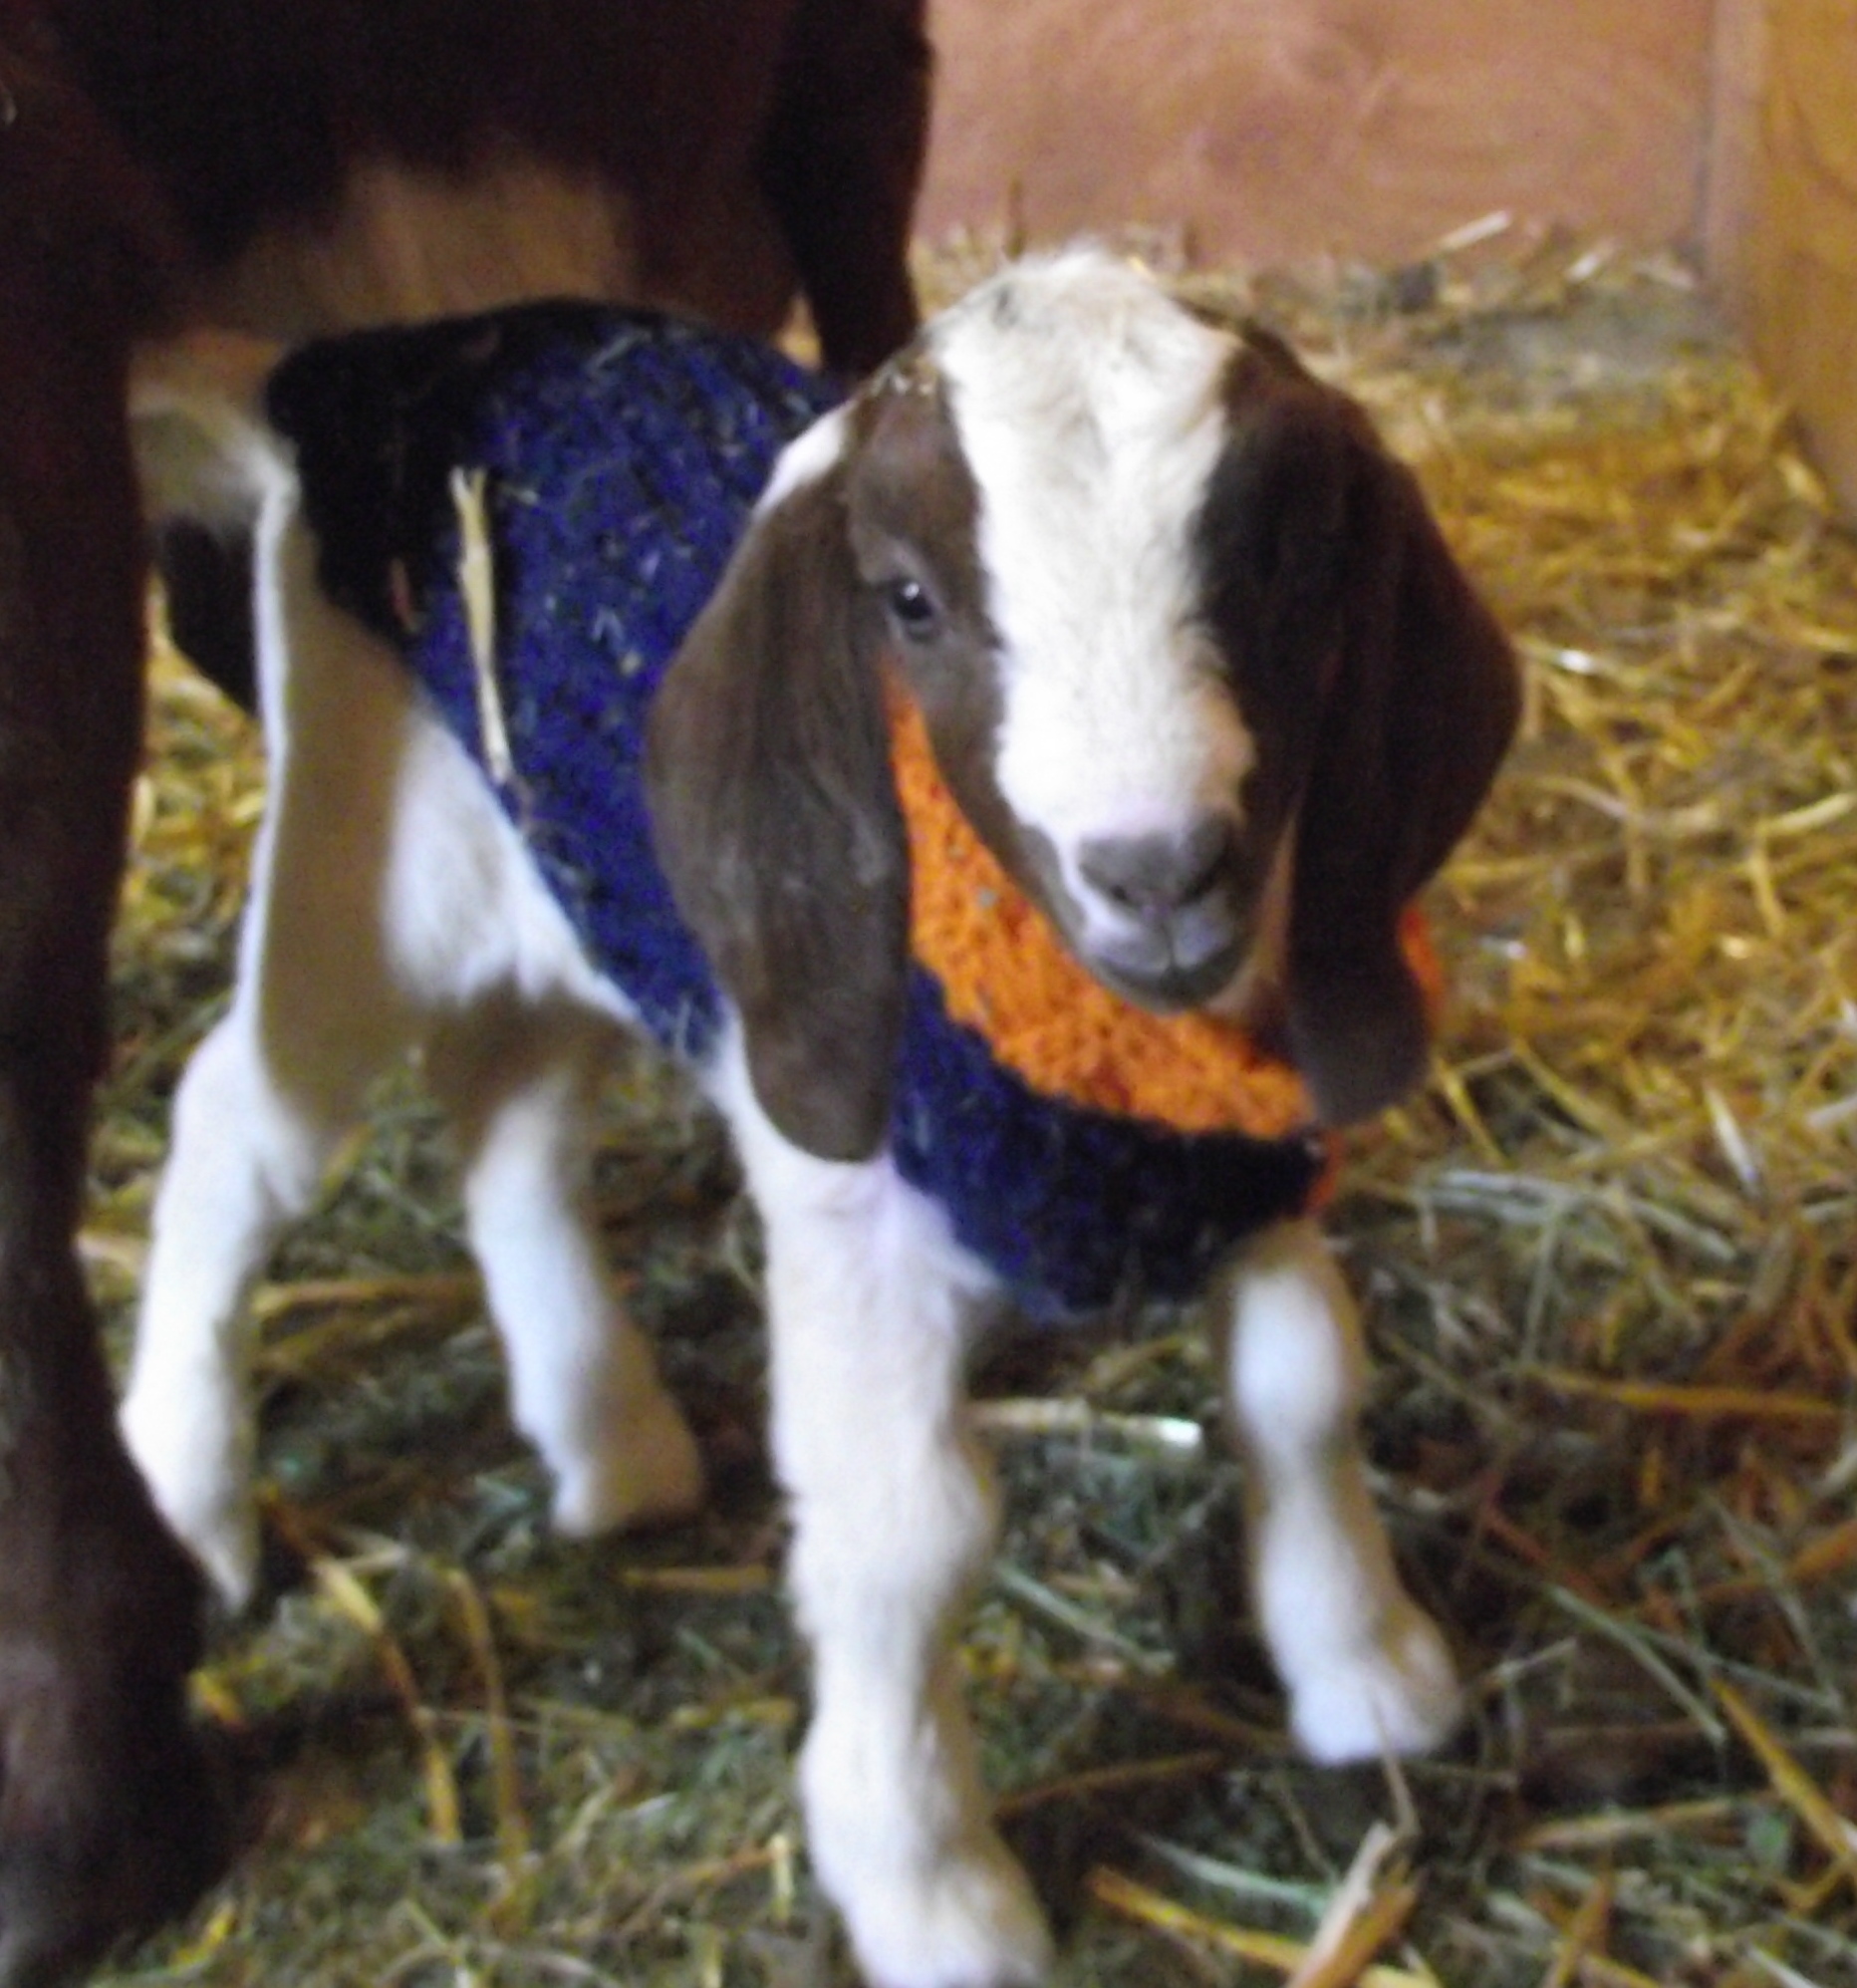 PHOTO: Goats Wear Knitted Super Bowl Sweaters Sporting Their ‘Broncos’ Spirit